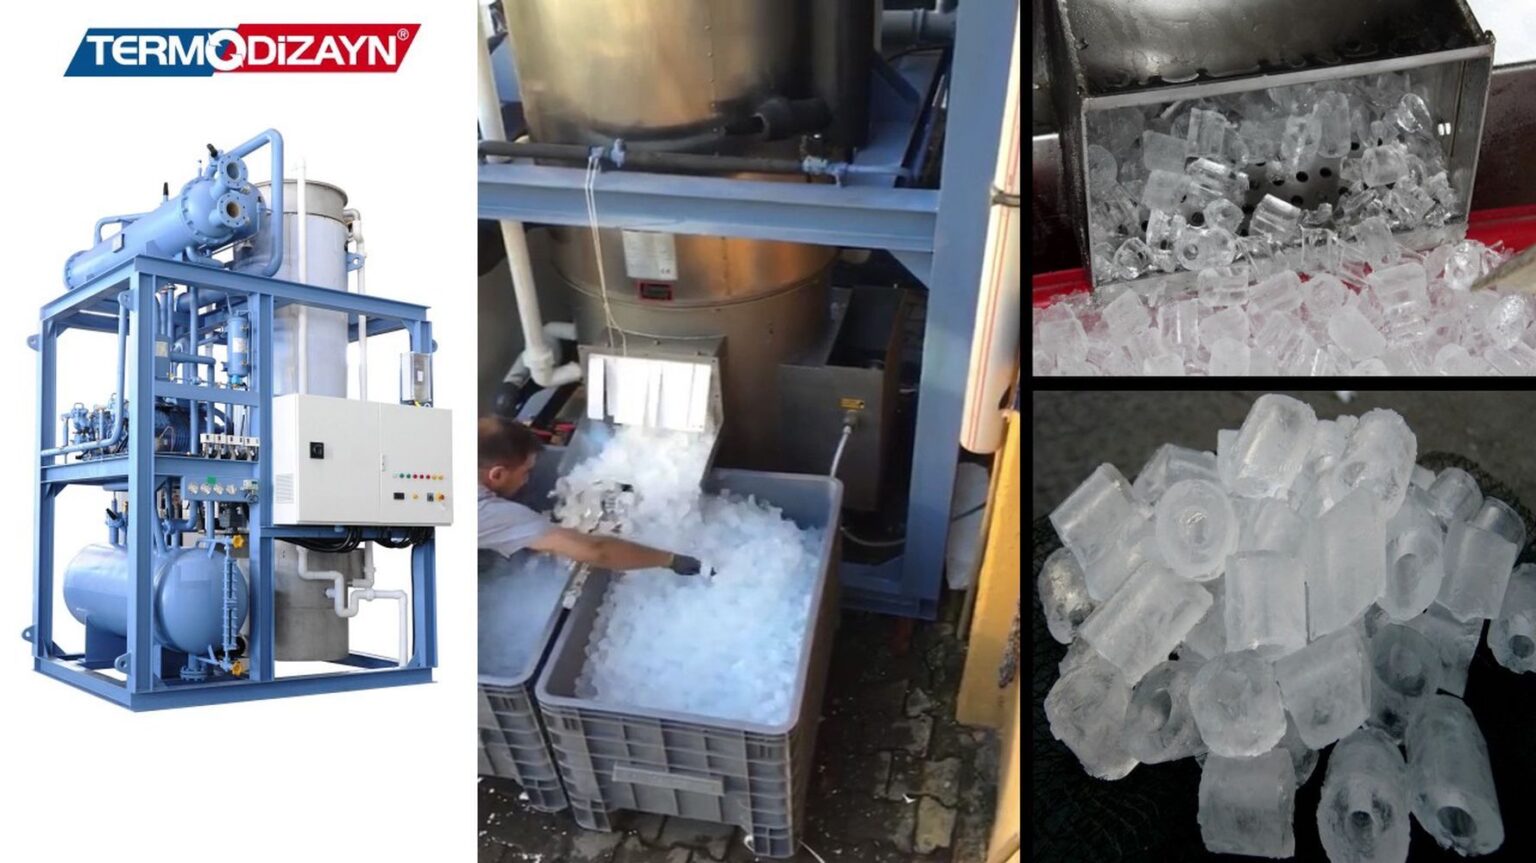 Termodizayn is one of the leading ice machine companies in Turkey. Here's everything you need to know about their ice makers.